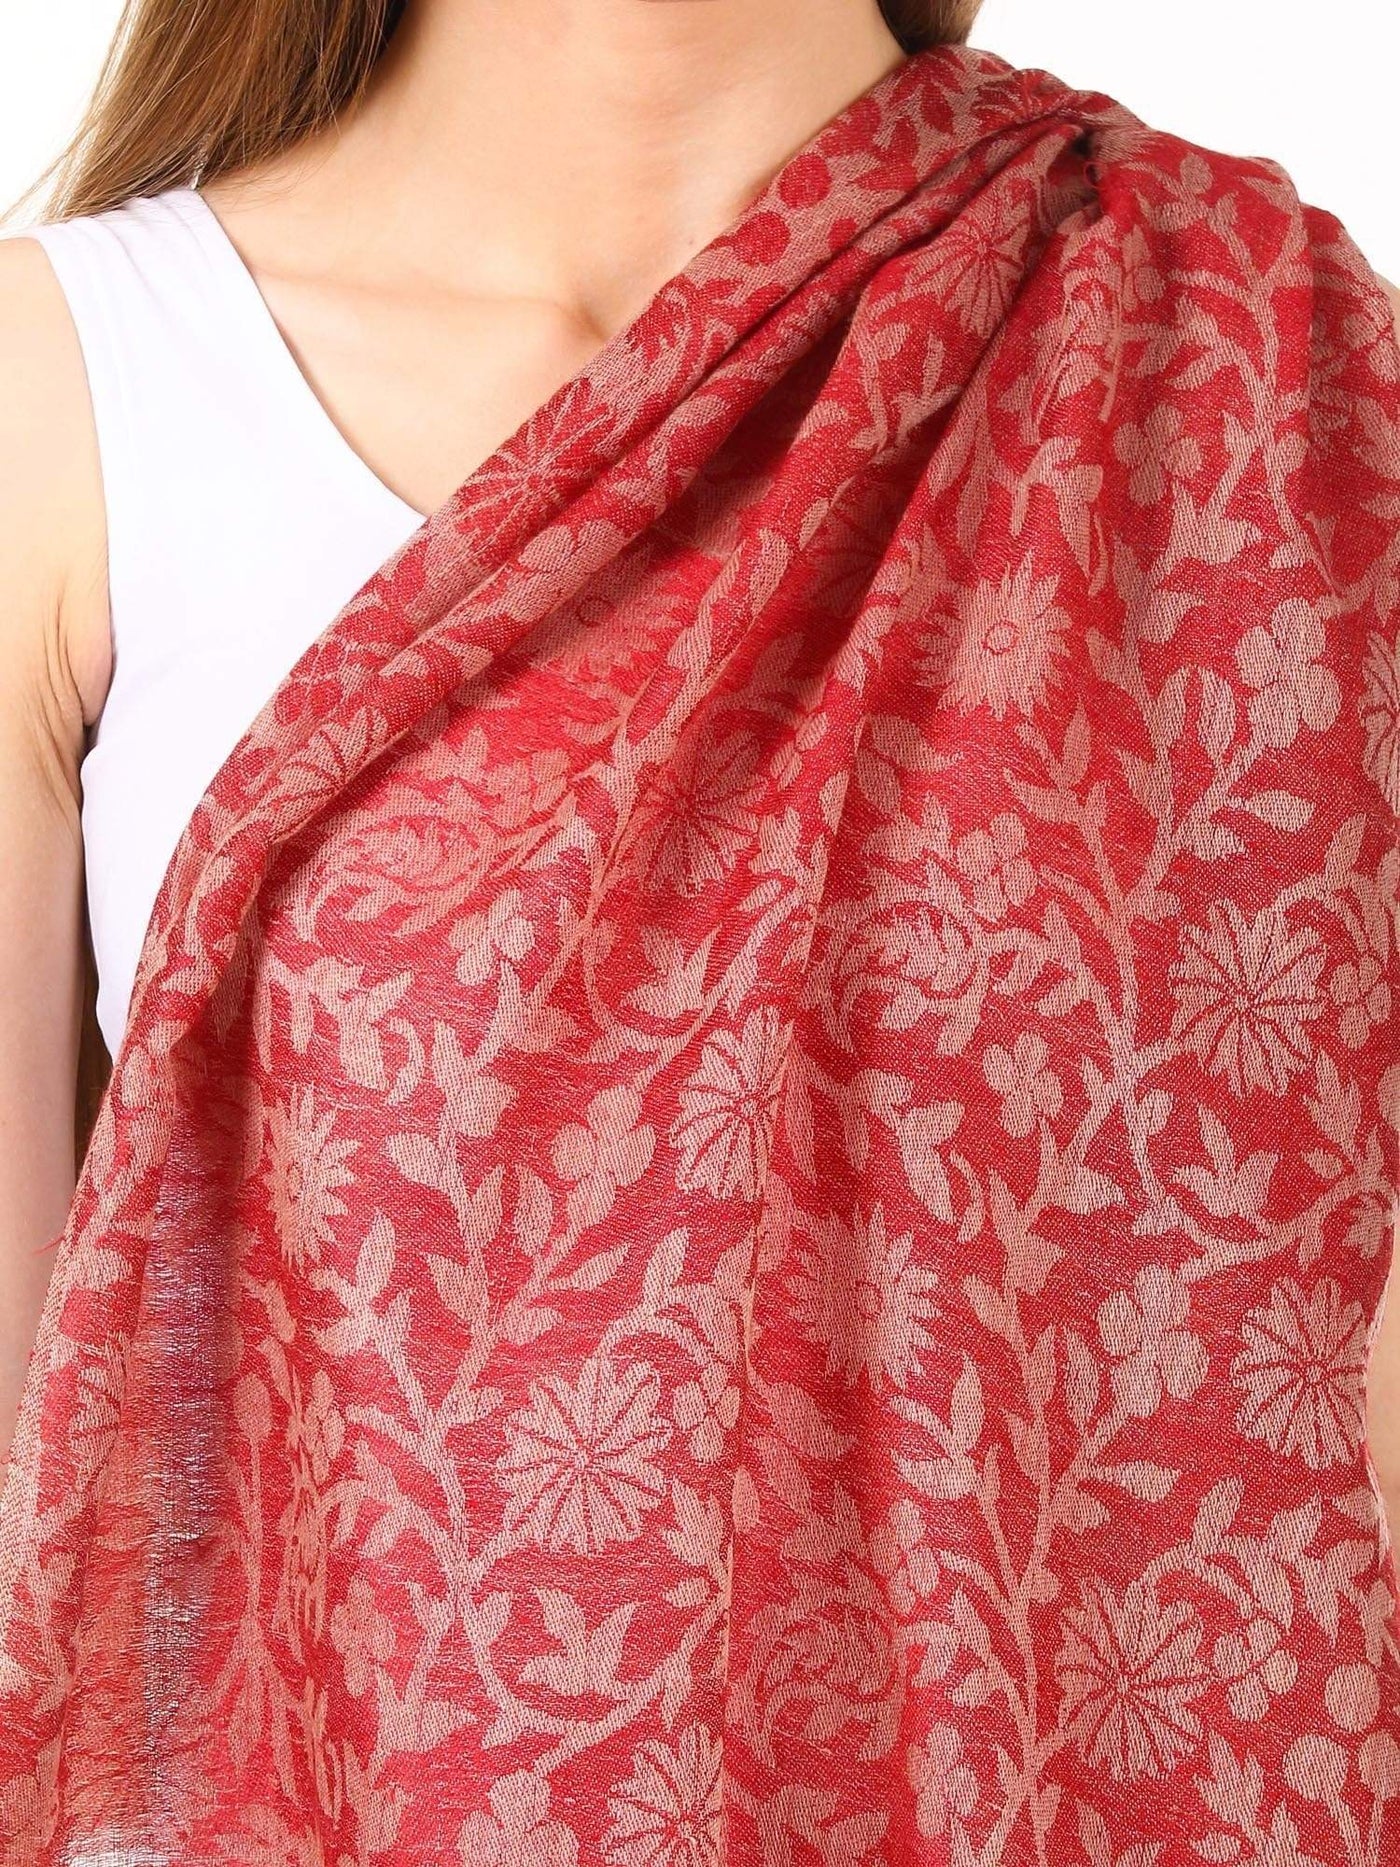 Pashtush Women'S Silk-Fine Wool Reversible Floral Scarf, Soft And Warm, Red